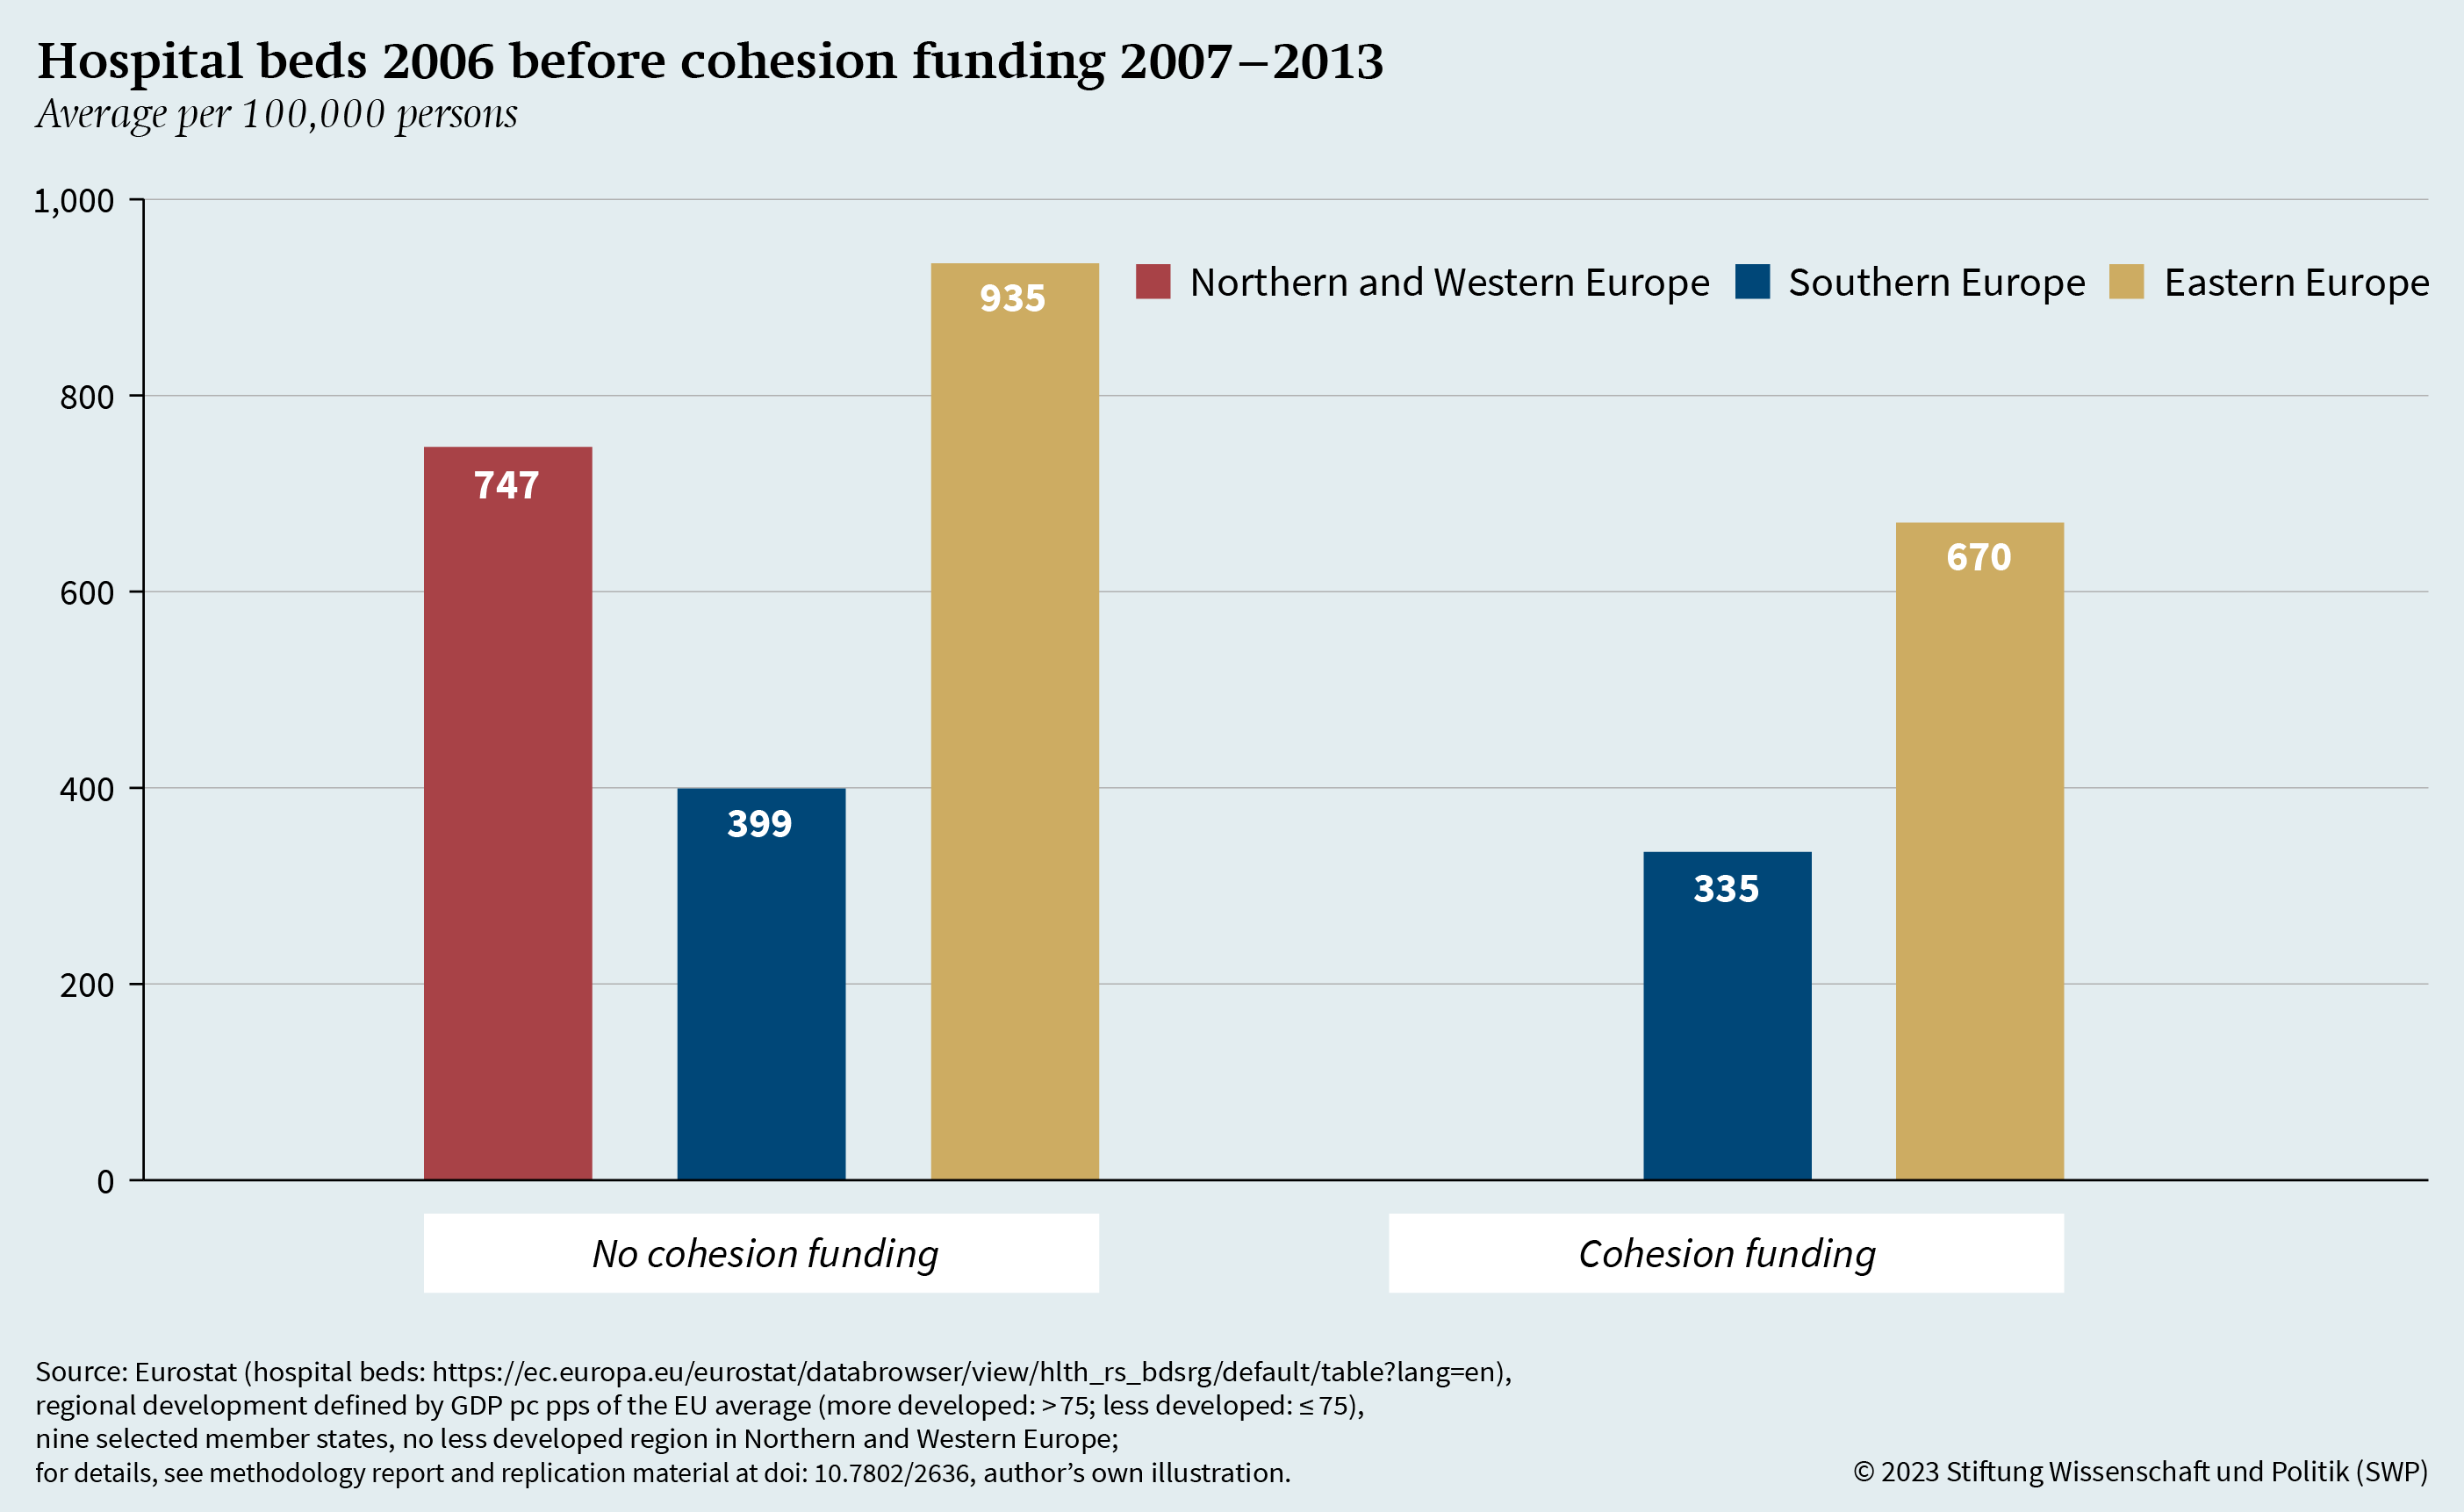 Figure A.6: Hospital beds 2006 before cohesion funding 2007–2013